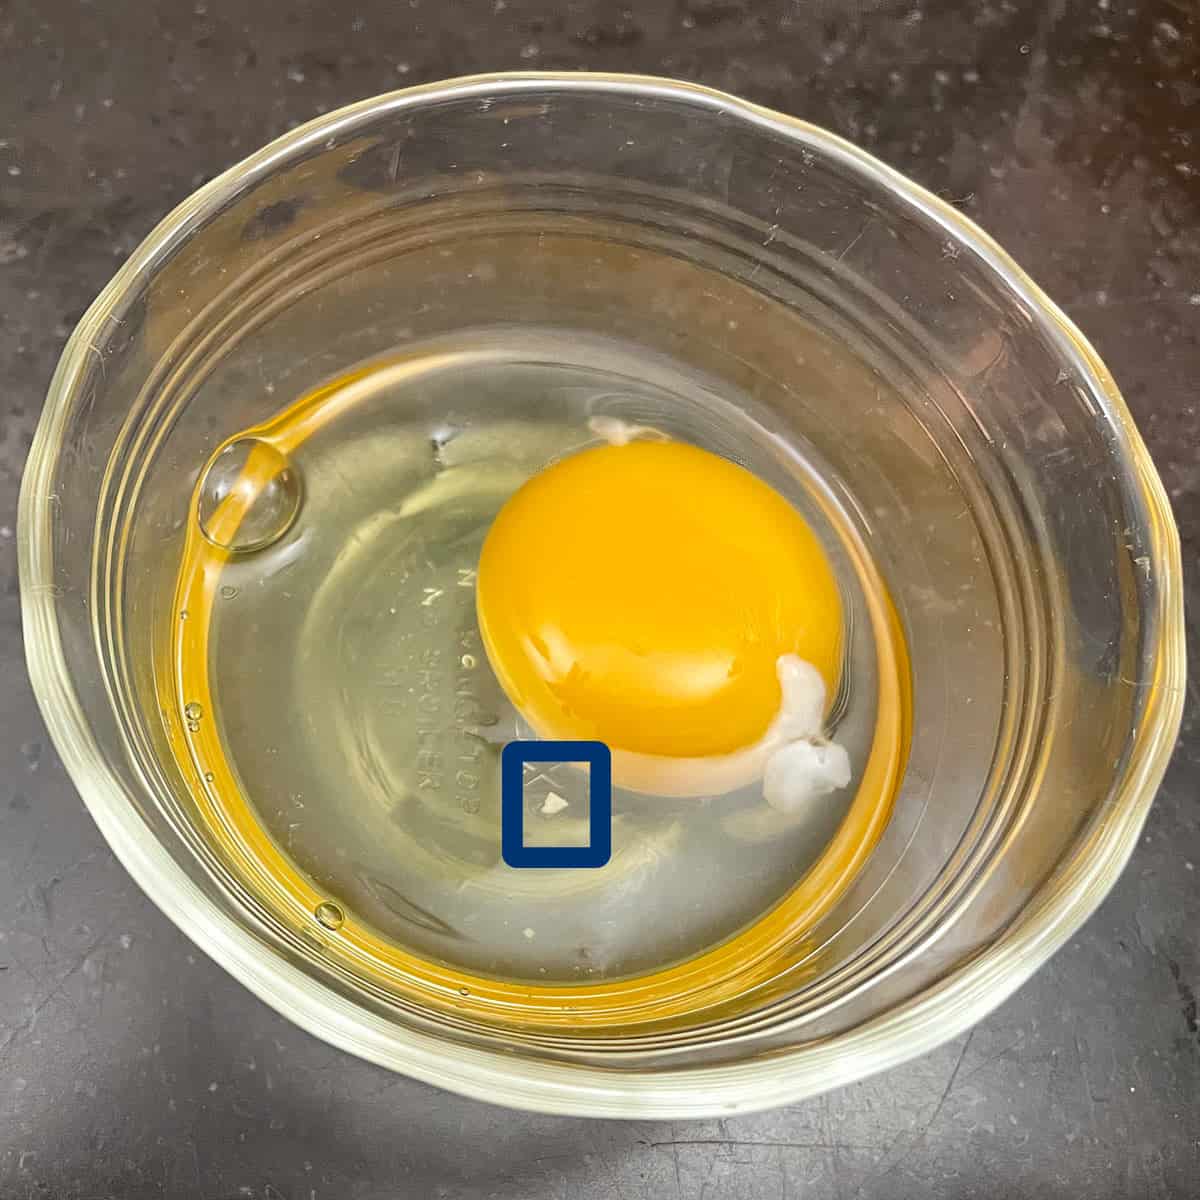 Raw egg in a small bowl showing a piece of eggshell that broke off when cracking the egg.